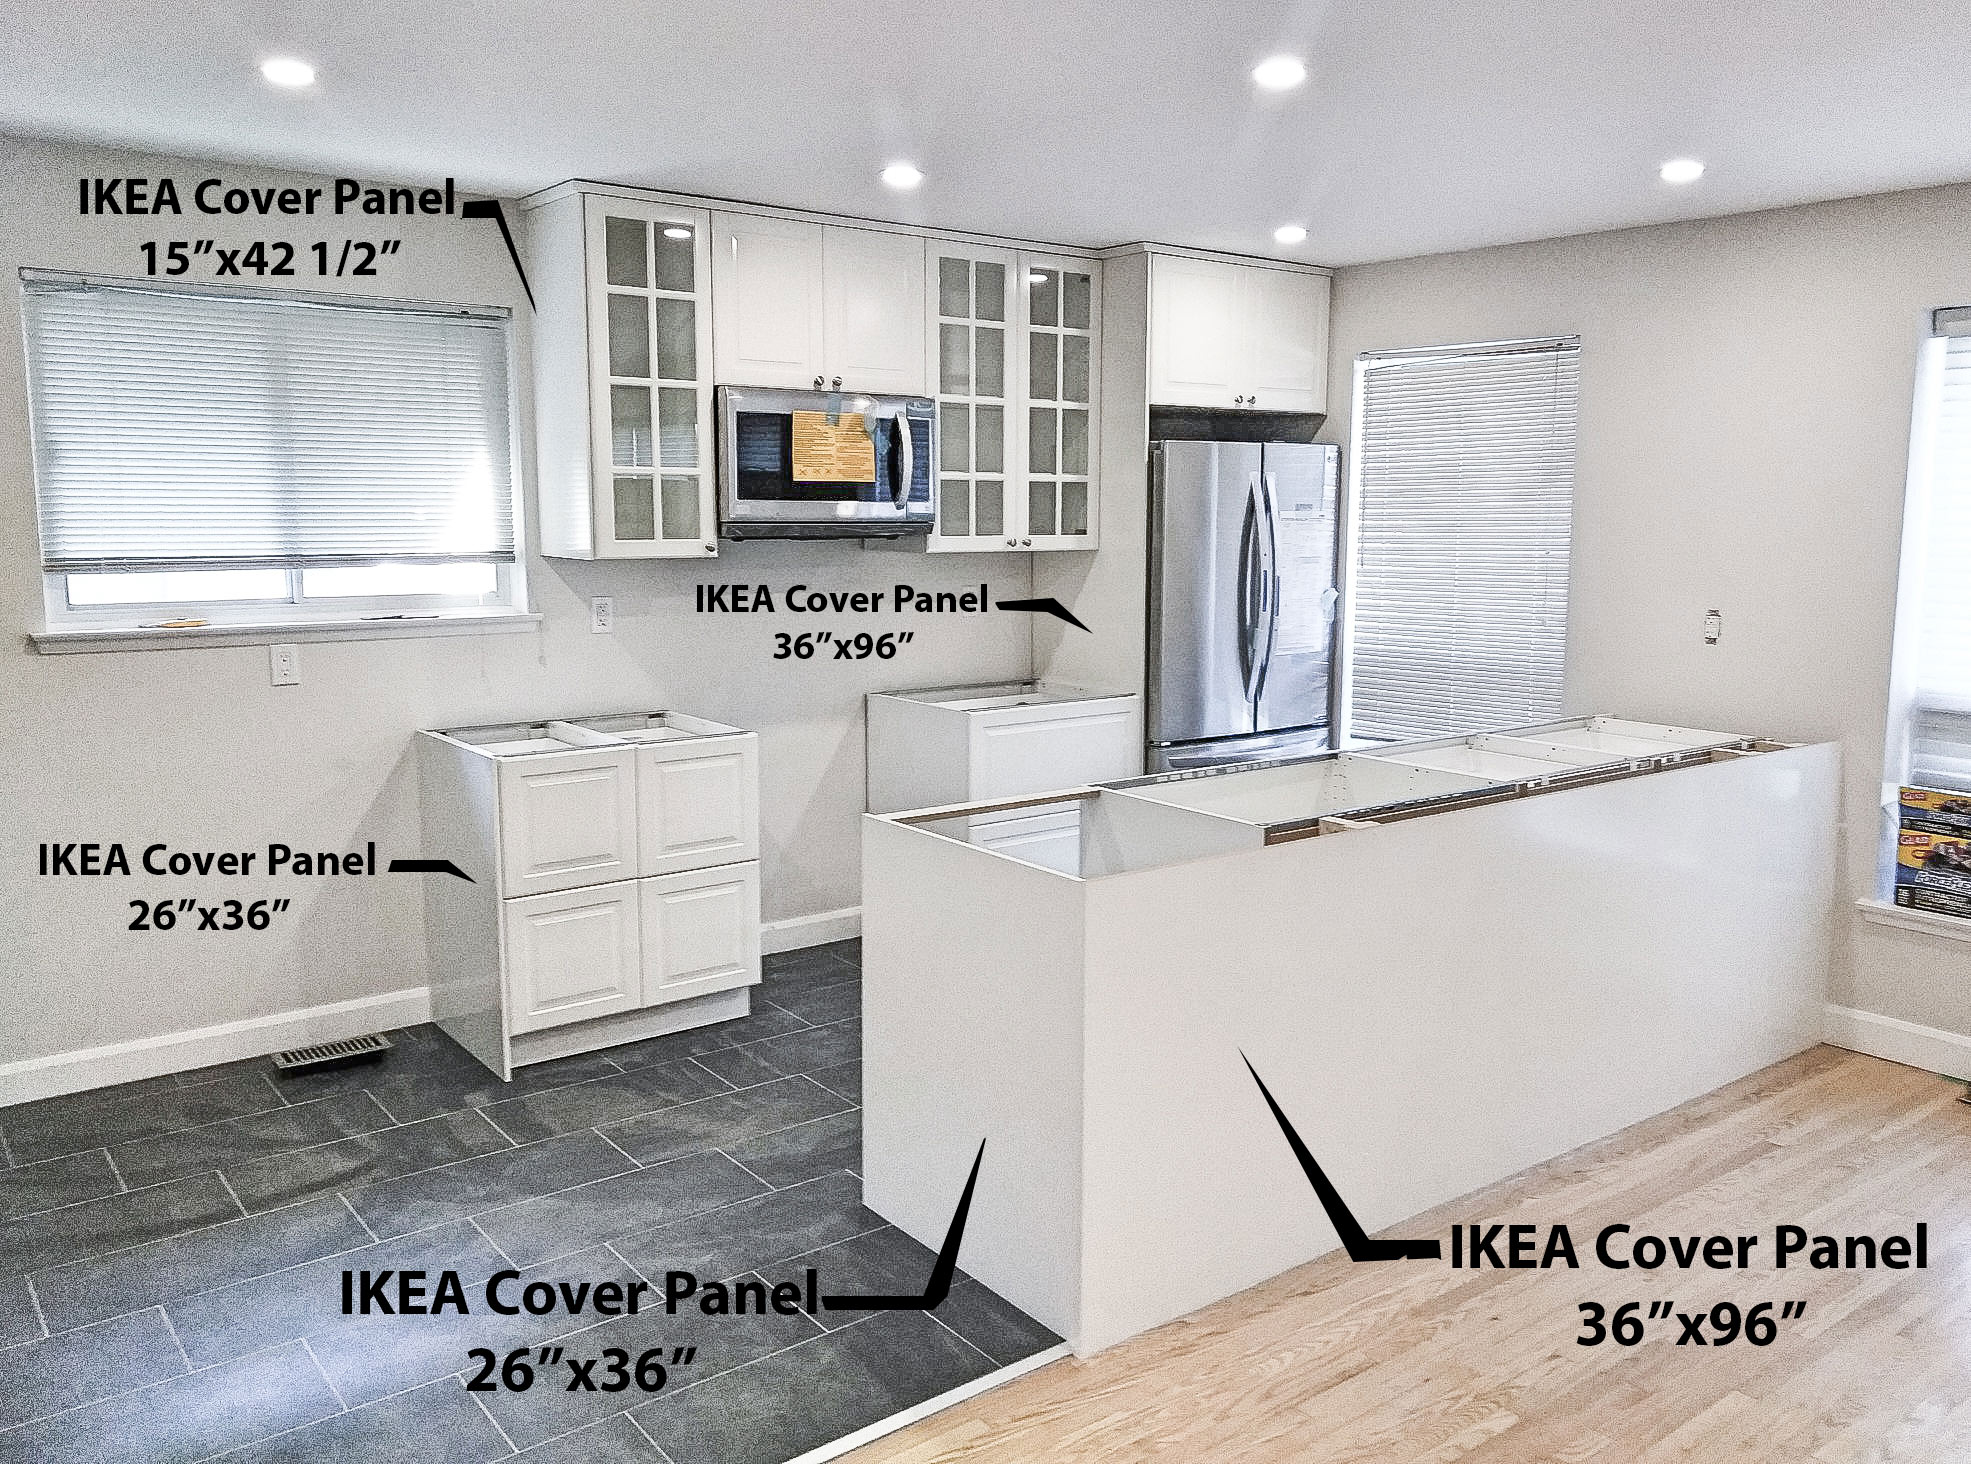 Ikea Kitchen With Cover Panels Explained 